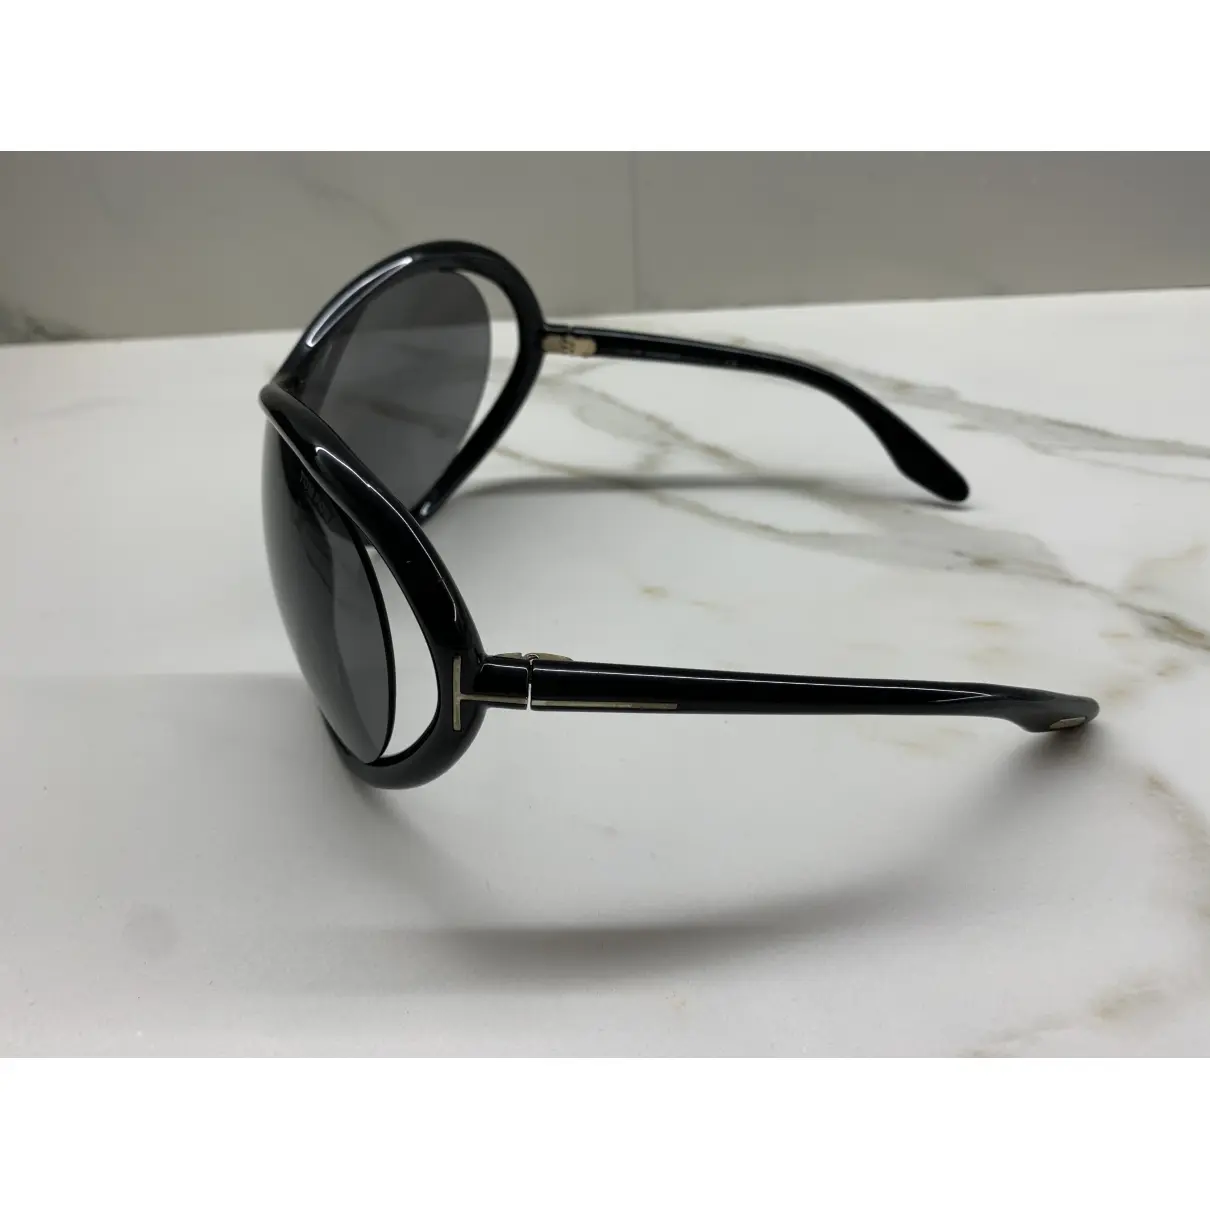 Tom Ford Oversized sunglasses for sale